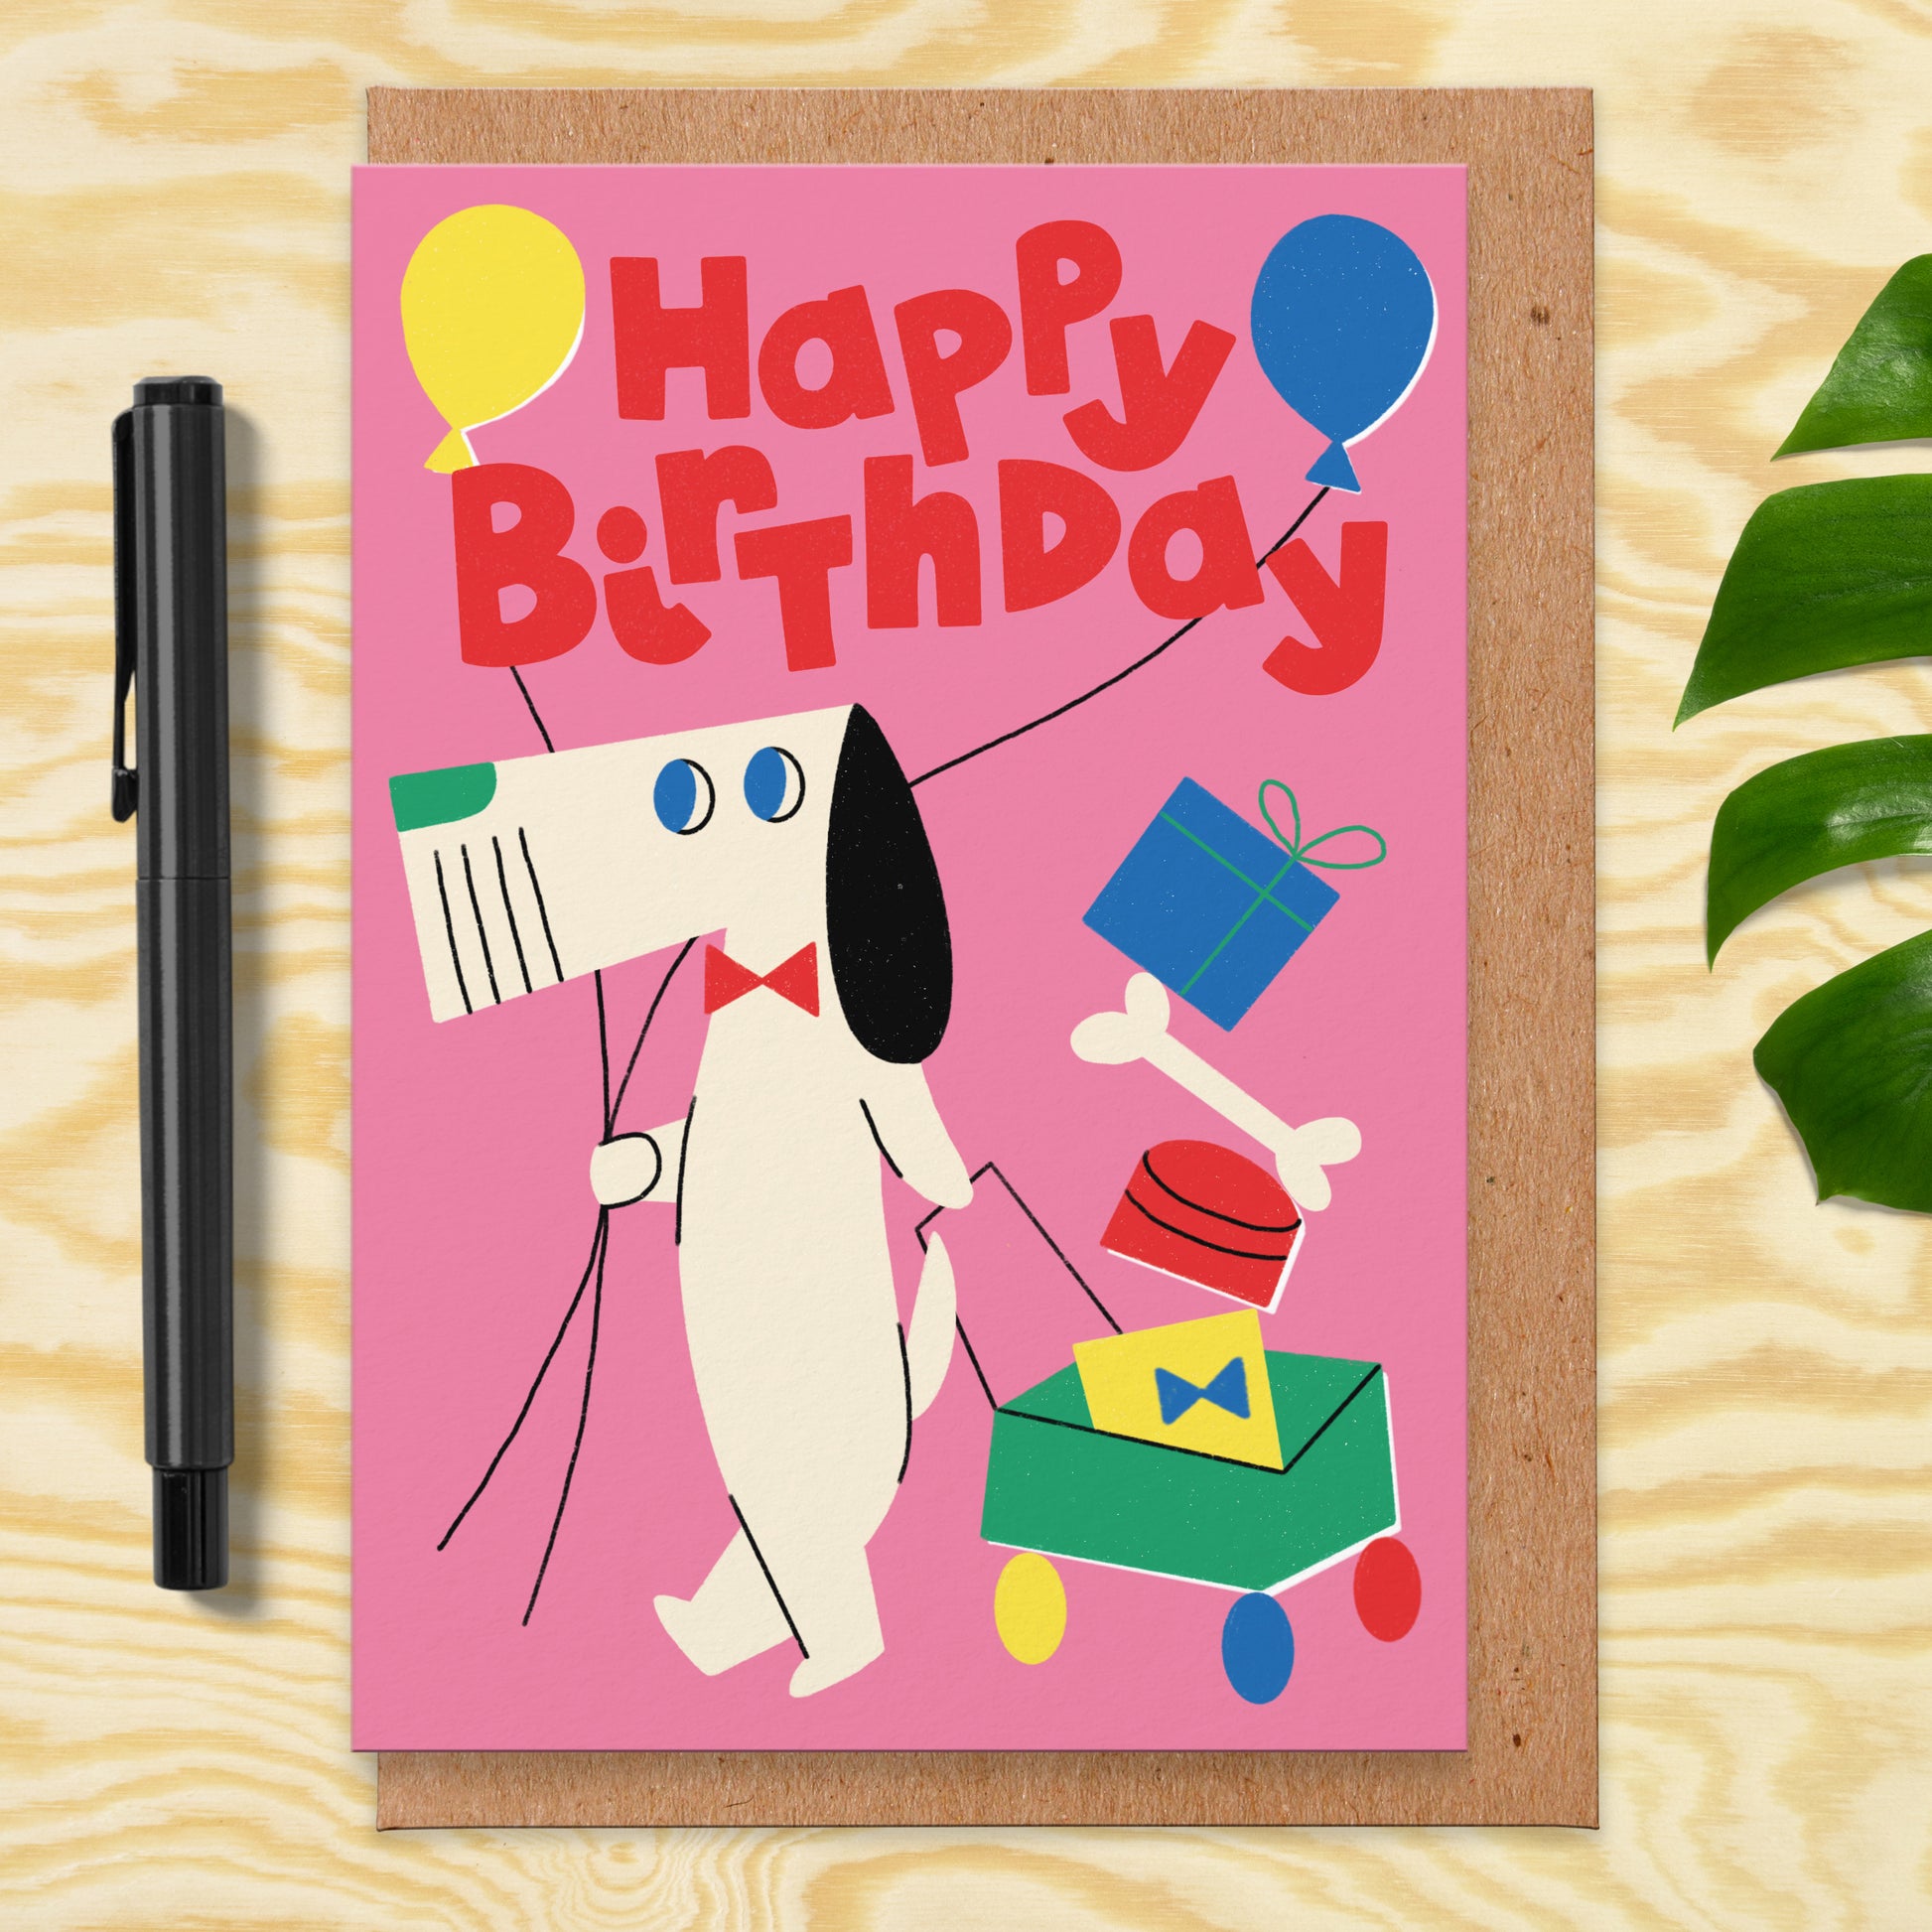 Pink greetings card that has an illustration of a dog holding balloons and pulling a trolley with presents in. The card reads happy birthday.